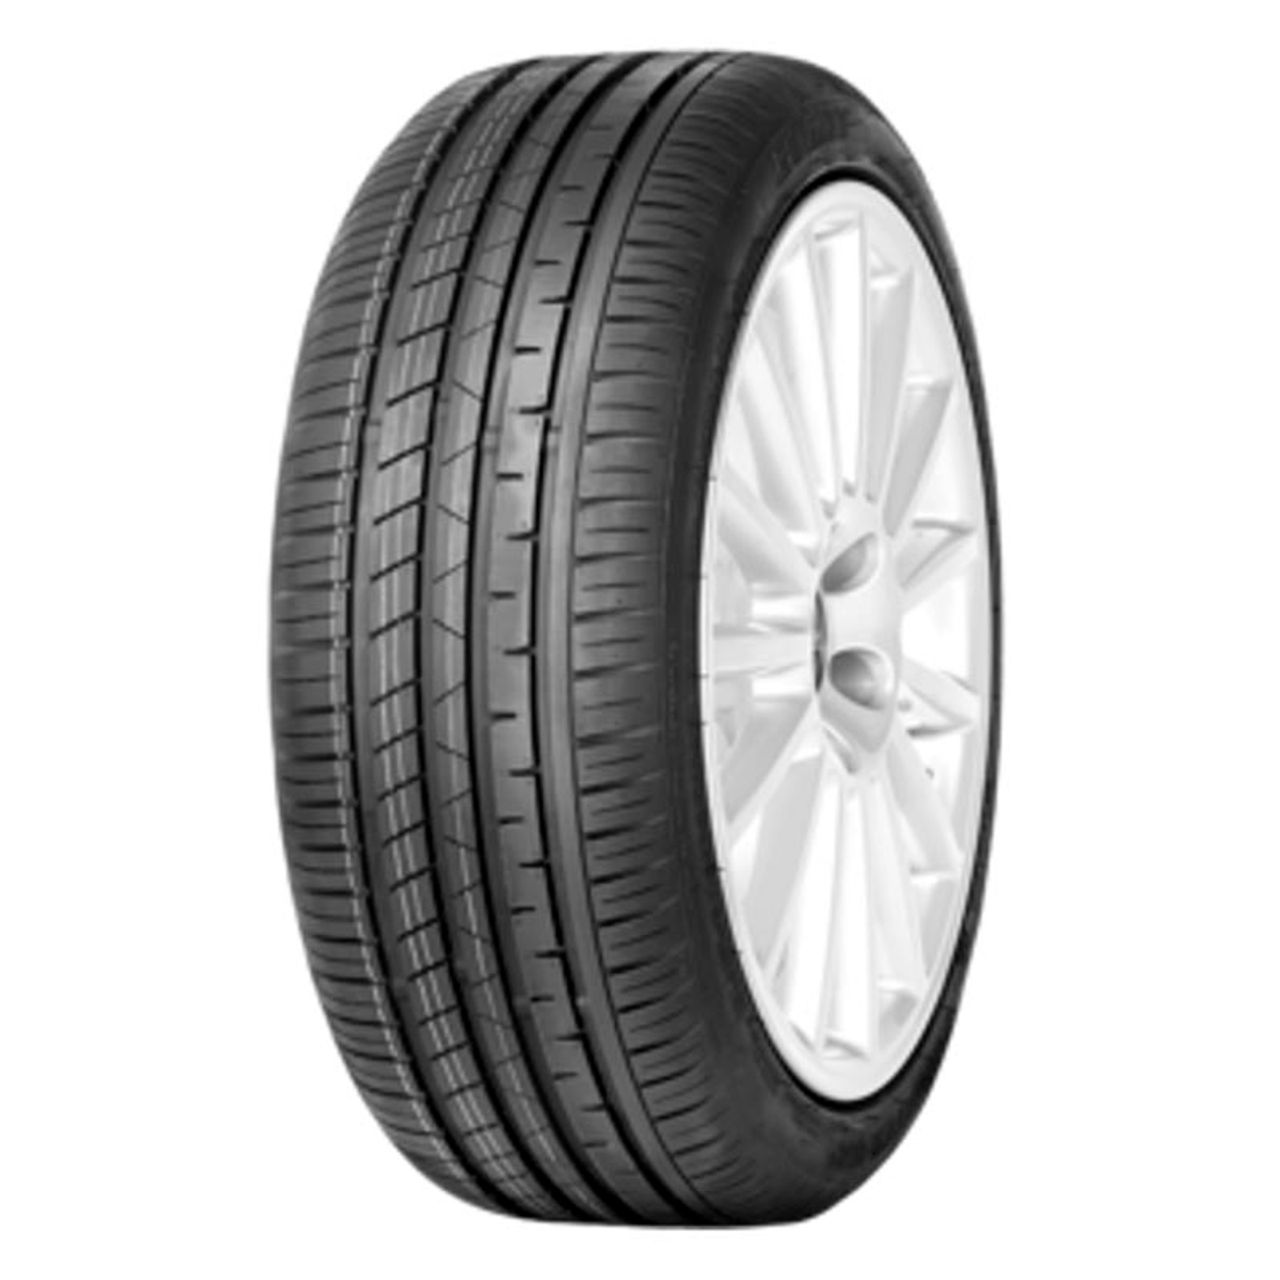 EVENT POTENTEM UHP 205/45R17 88W BSW XL